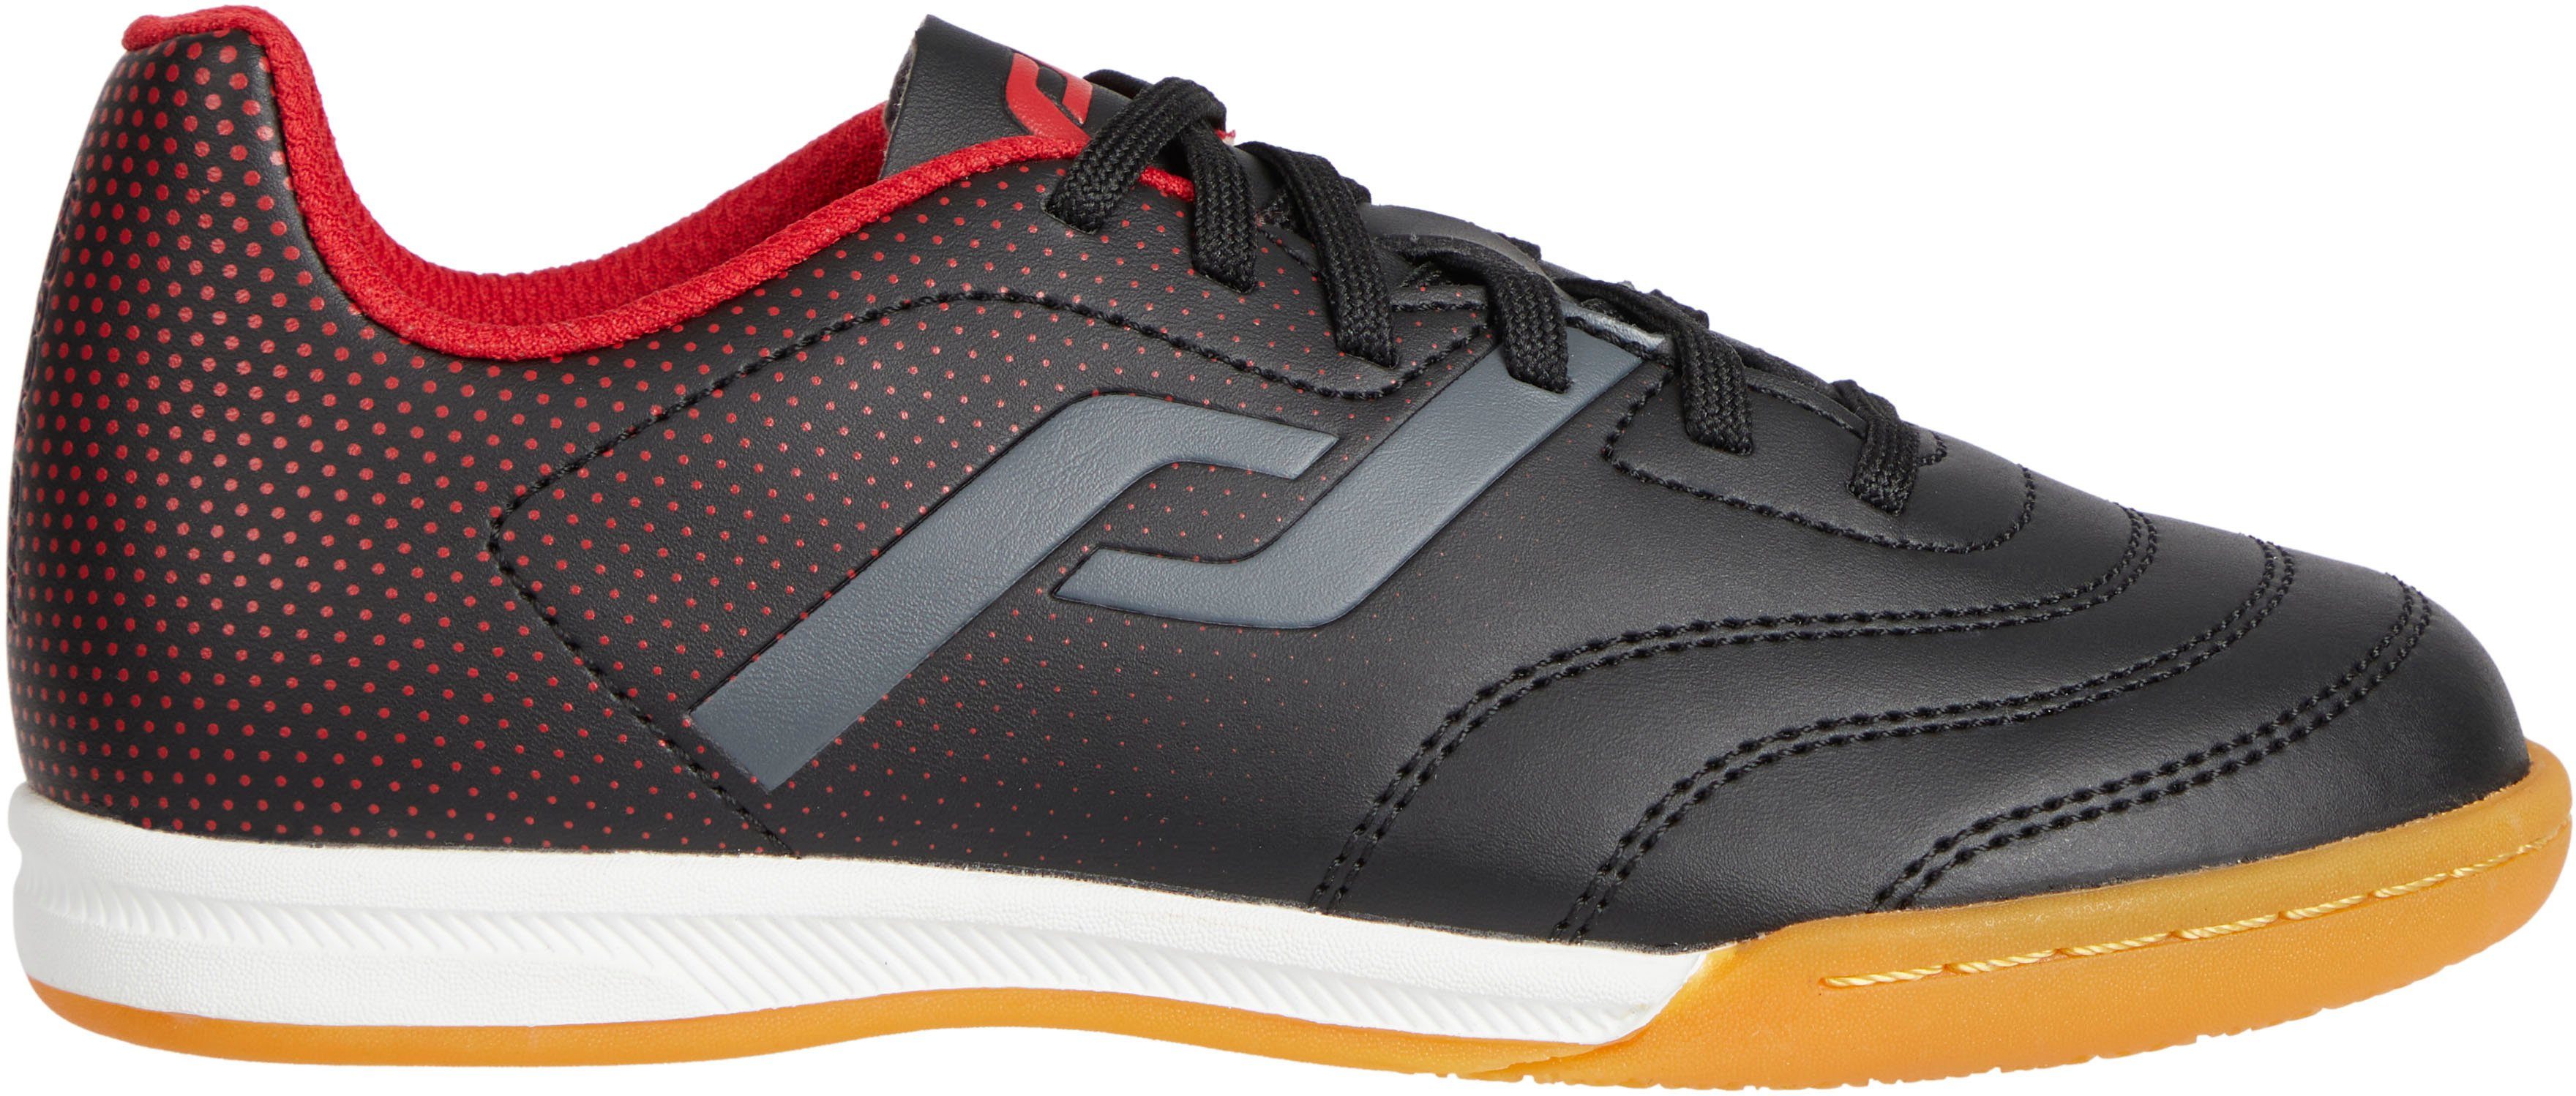 Ind Pro Touch JR Fußballschuh BLACK/RED/ANTHRACITE Classic IN III